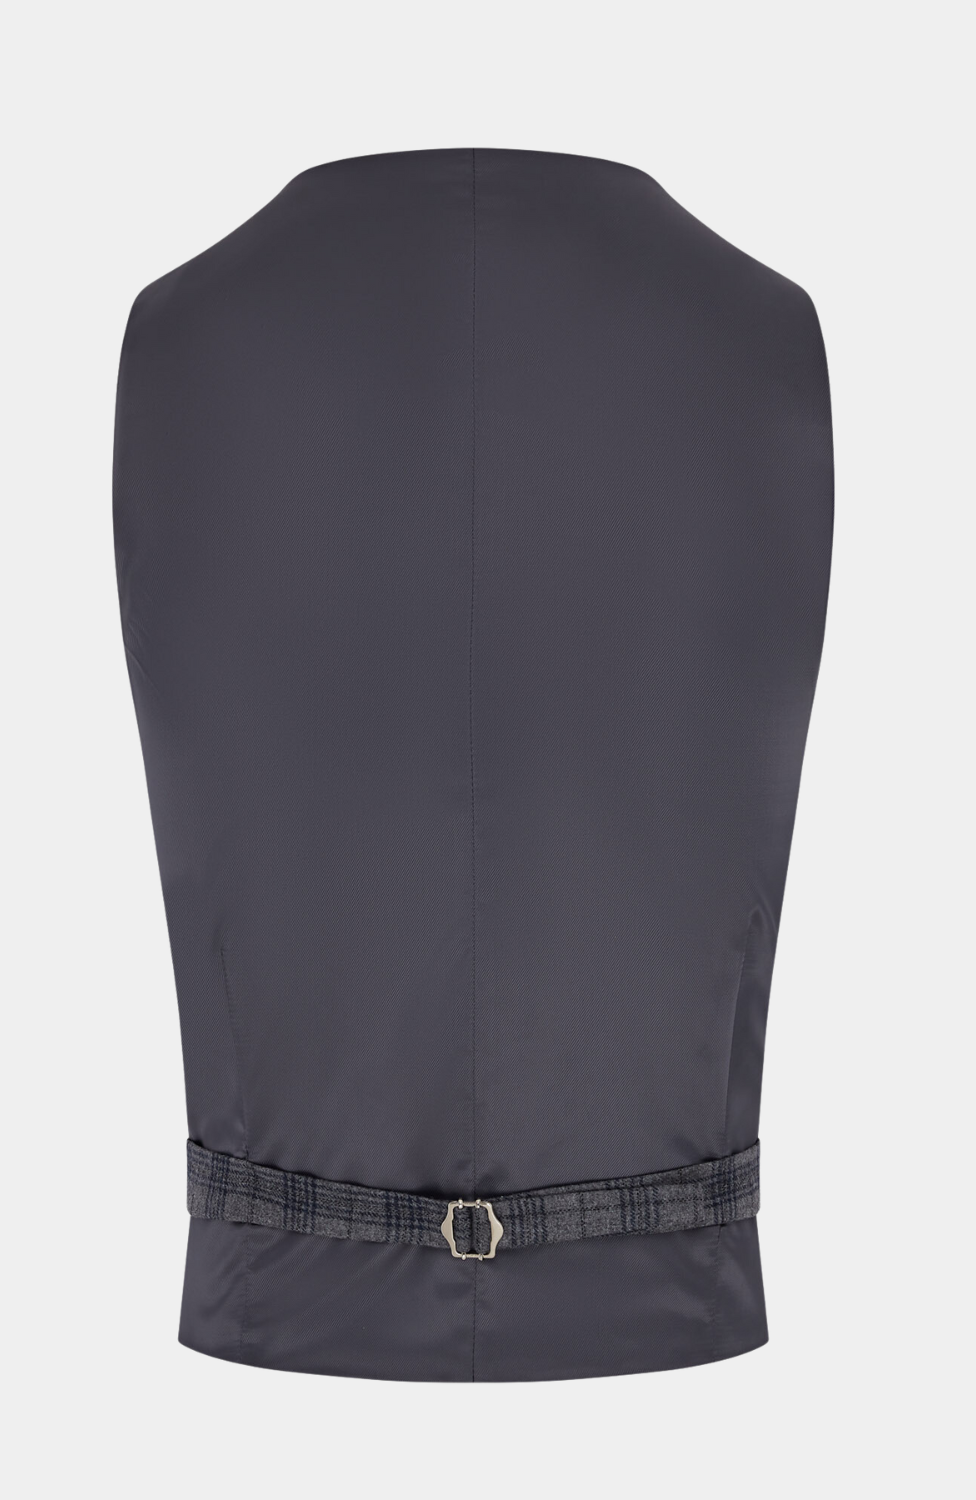 MAIDENS DOUBLE BREASTED WAISTCOAT - HIRE: £25.00